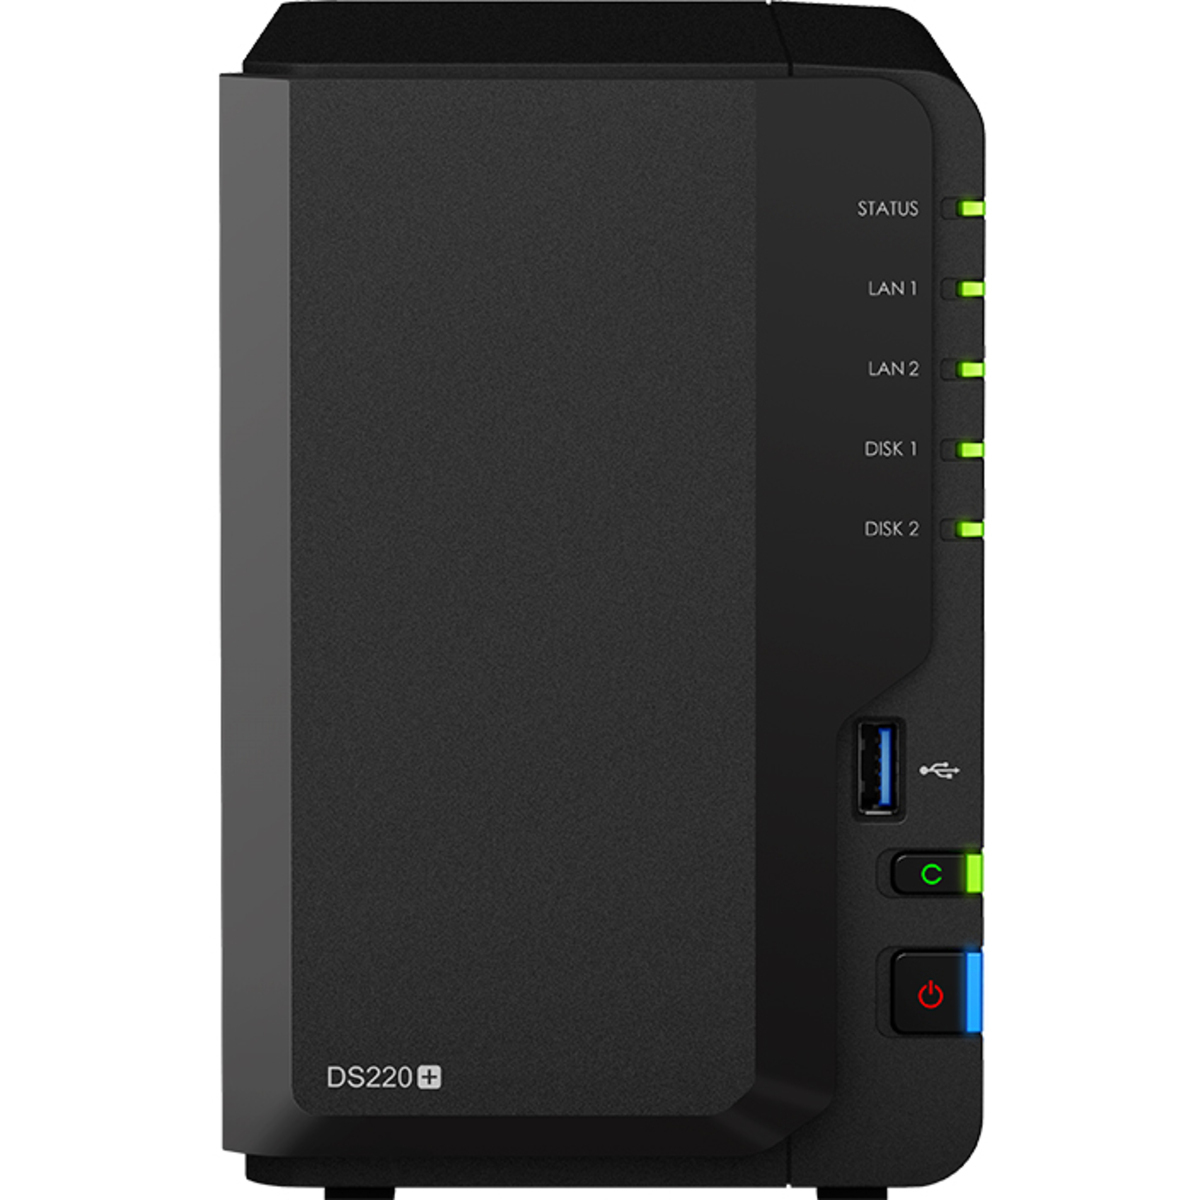 buy $2222 Synology DiskStation DS220+ 16tb Desktop NAS - Network Attached Storage Device 2x8000gb Samsung 870 QVO MZ-77Q8T0 2.5 SATA 6Gb/s SSD CONSUMER Class Drives Installed - Burn-In Tested - FREE RAM UPGRADE - nas headquarters buy network attached storage server device das new raid-5 free shipping usa christmas new year holiday sale DiskStation DS220+